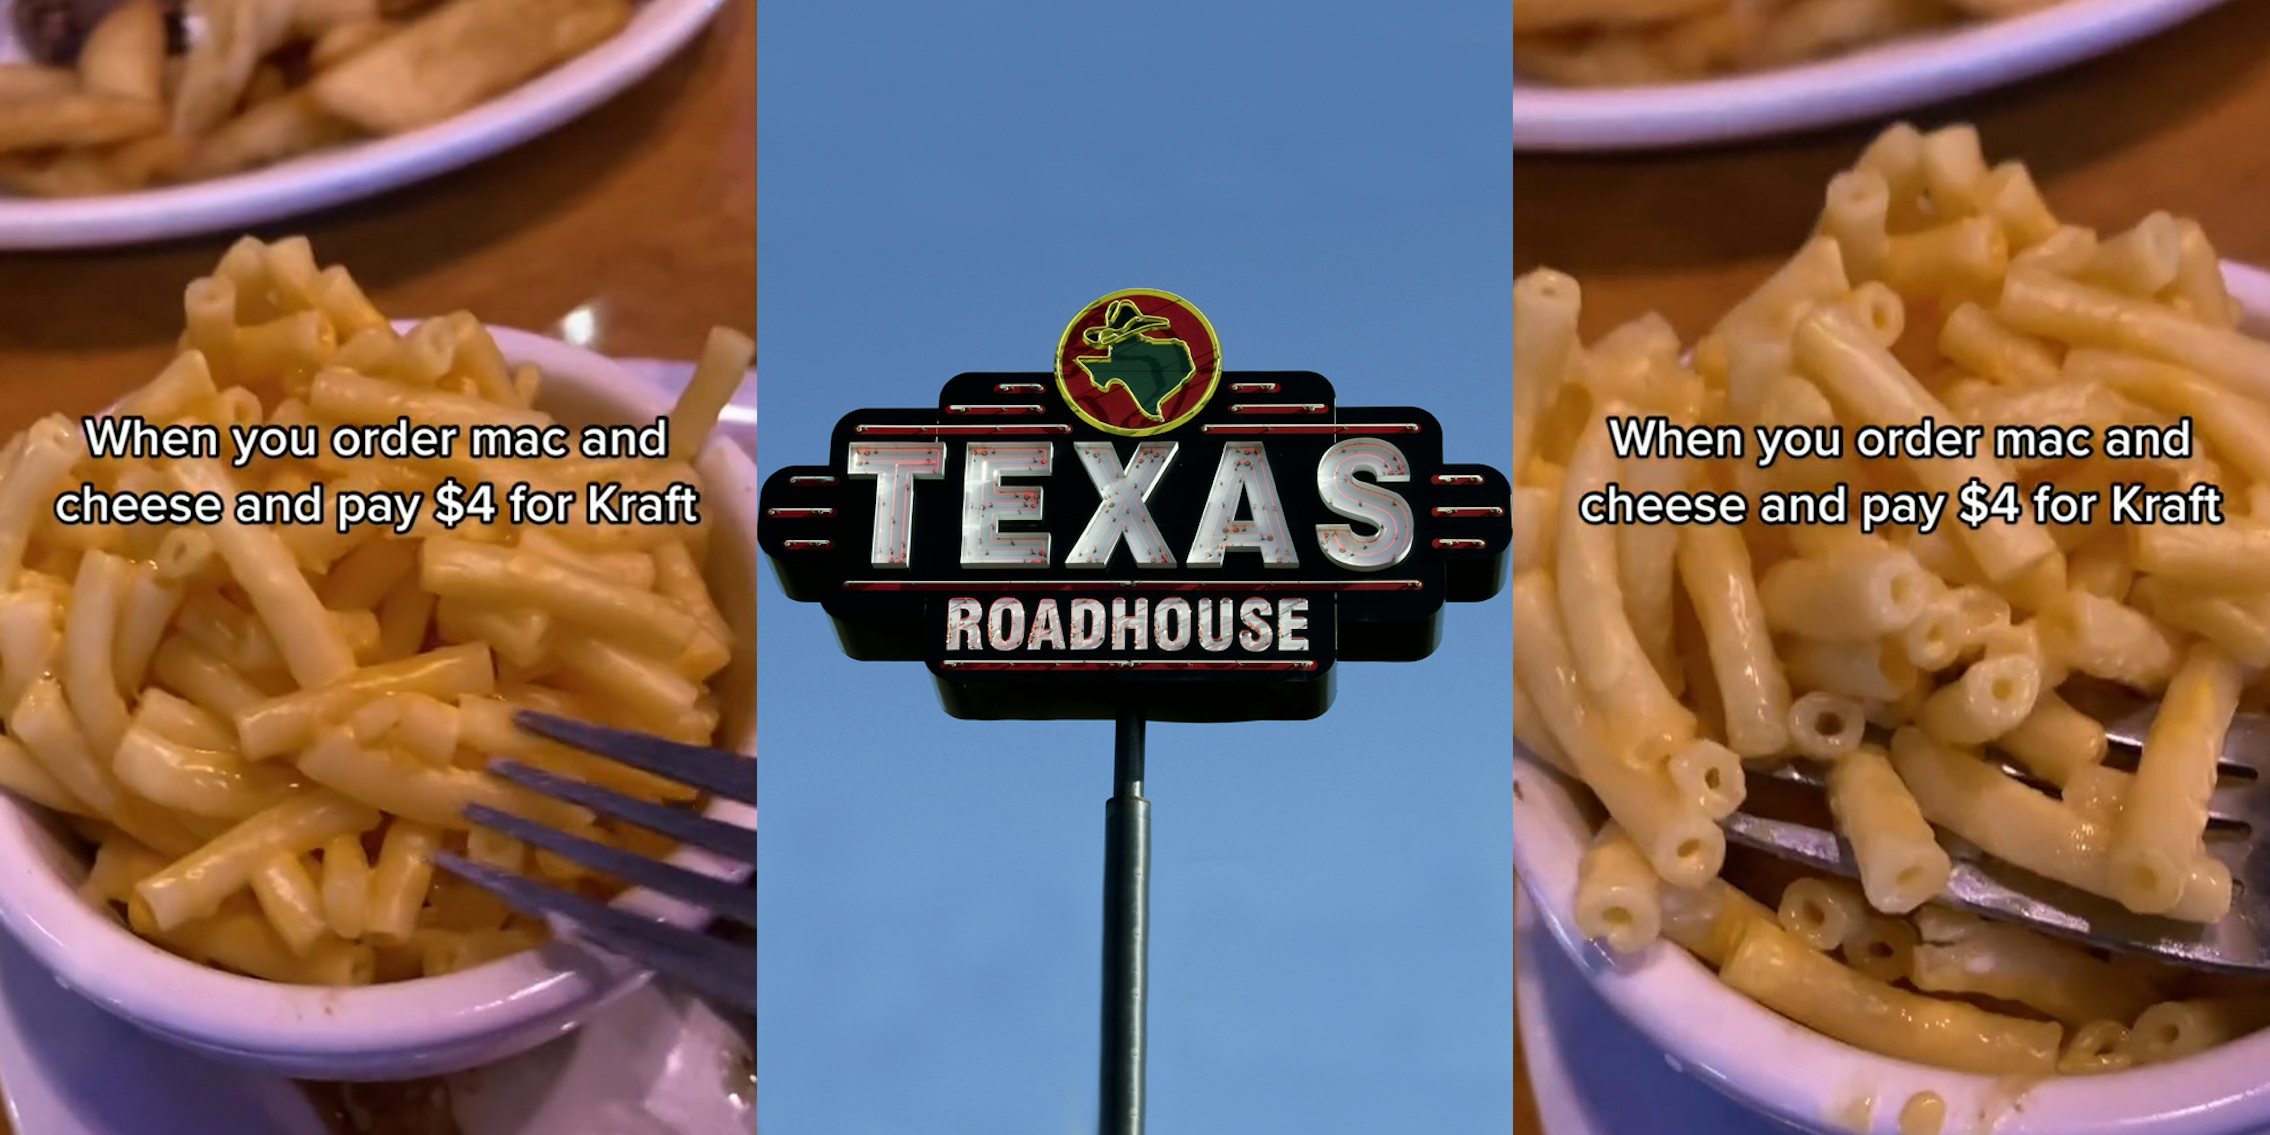 Kraft mac n cheese in bowl on table caption 'When you order man and cheese and pay $4 for Kraft' (l) Texas Roadhouse sign in front of blue sky (c) Kraft mac n cheese in bowl on table caption 'When you order man and cheese and pay $4 for Kraft' (r)